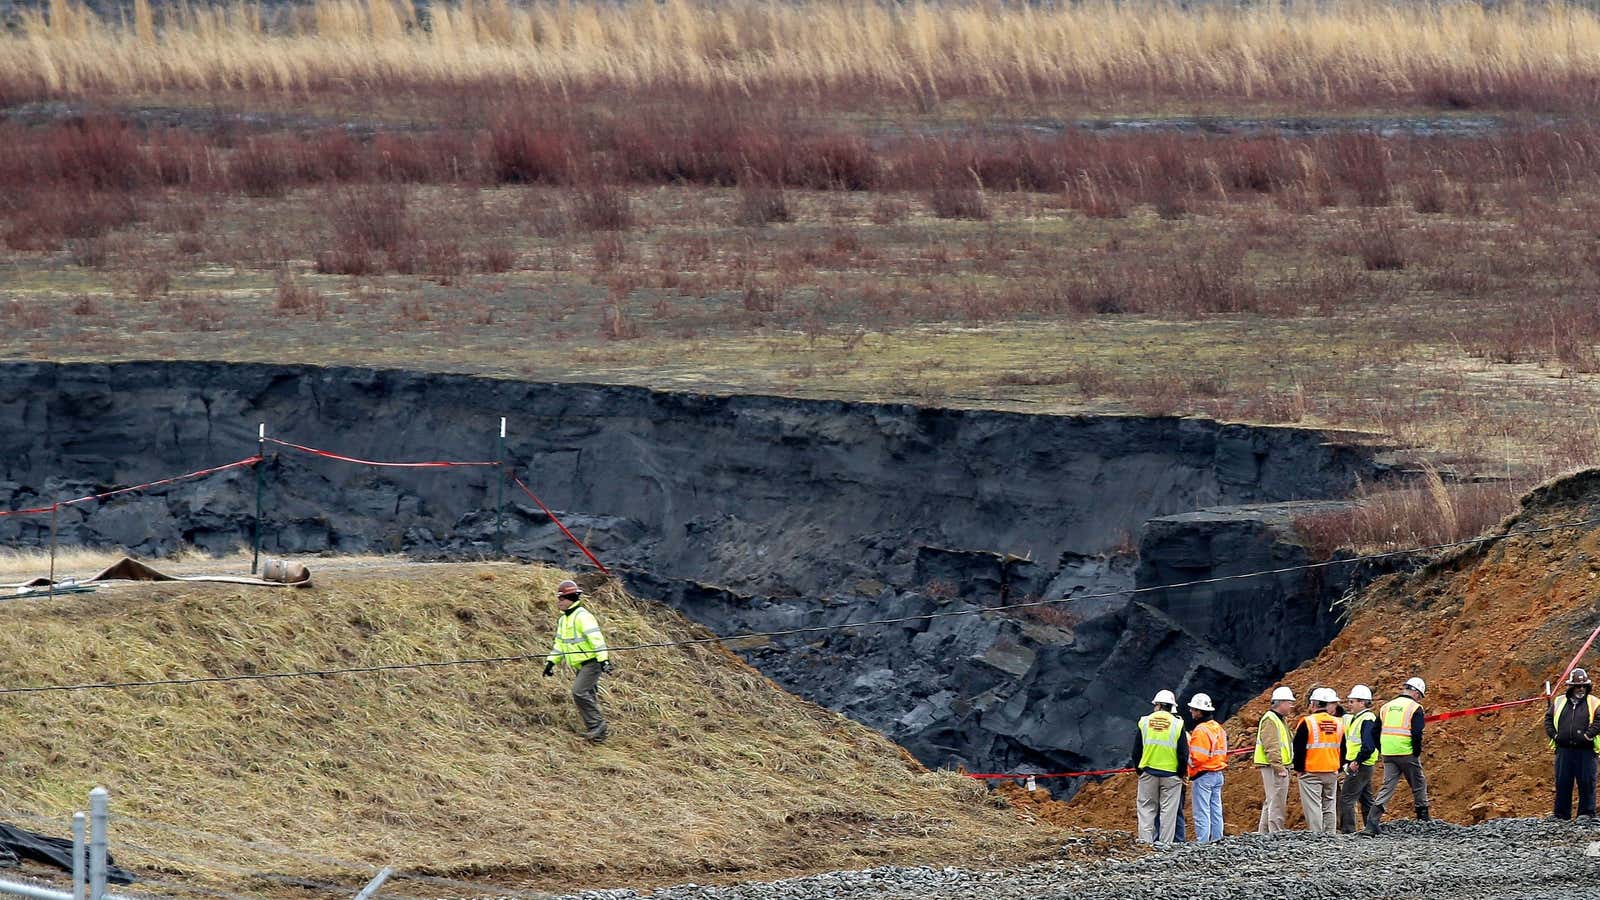 In 2014, Duke Energy spilled coal ash into the Dan River in North Carolina. Seventy miles of the river were coated in toxic sludge.